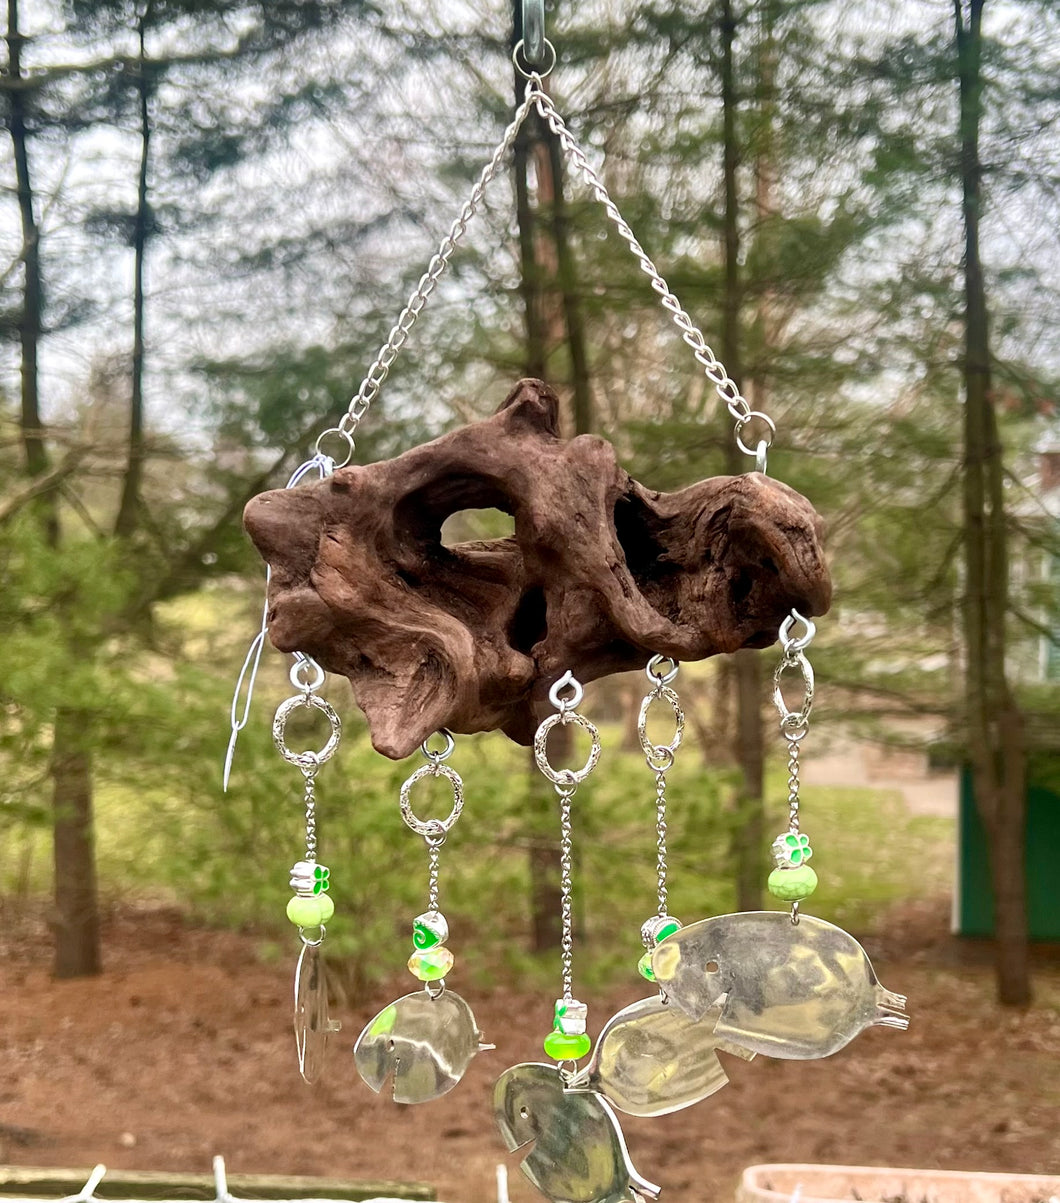 Spoon Fish & Driftwood Chime #26